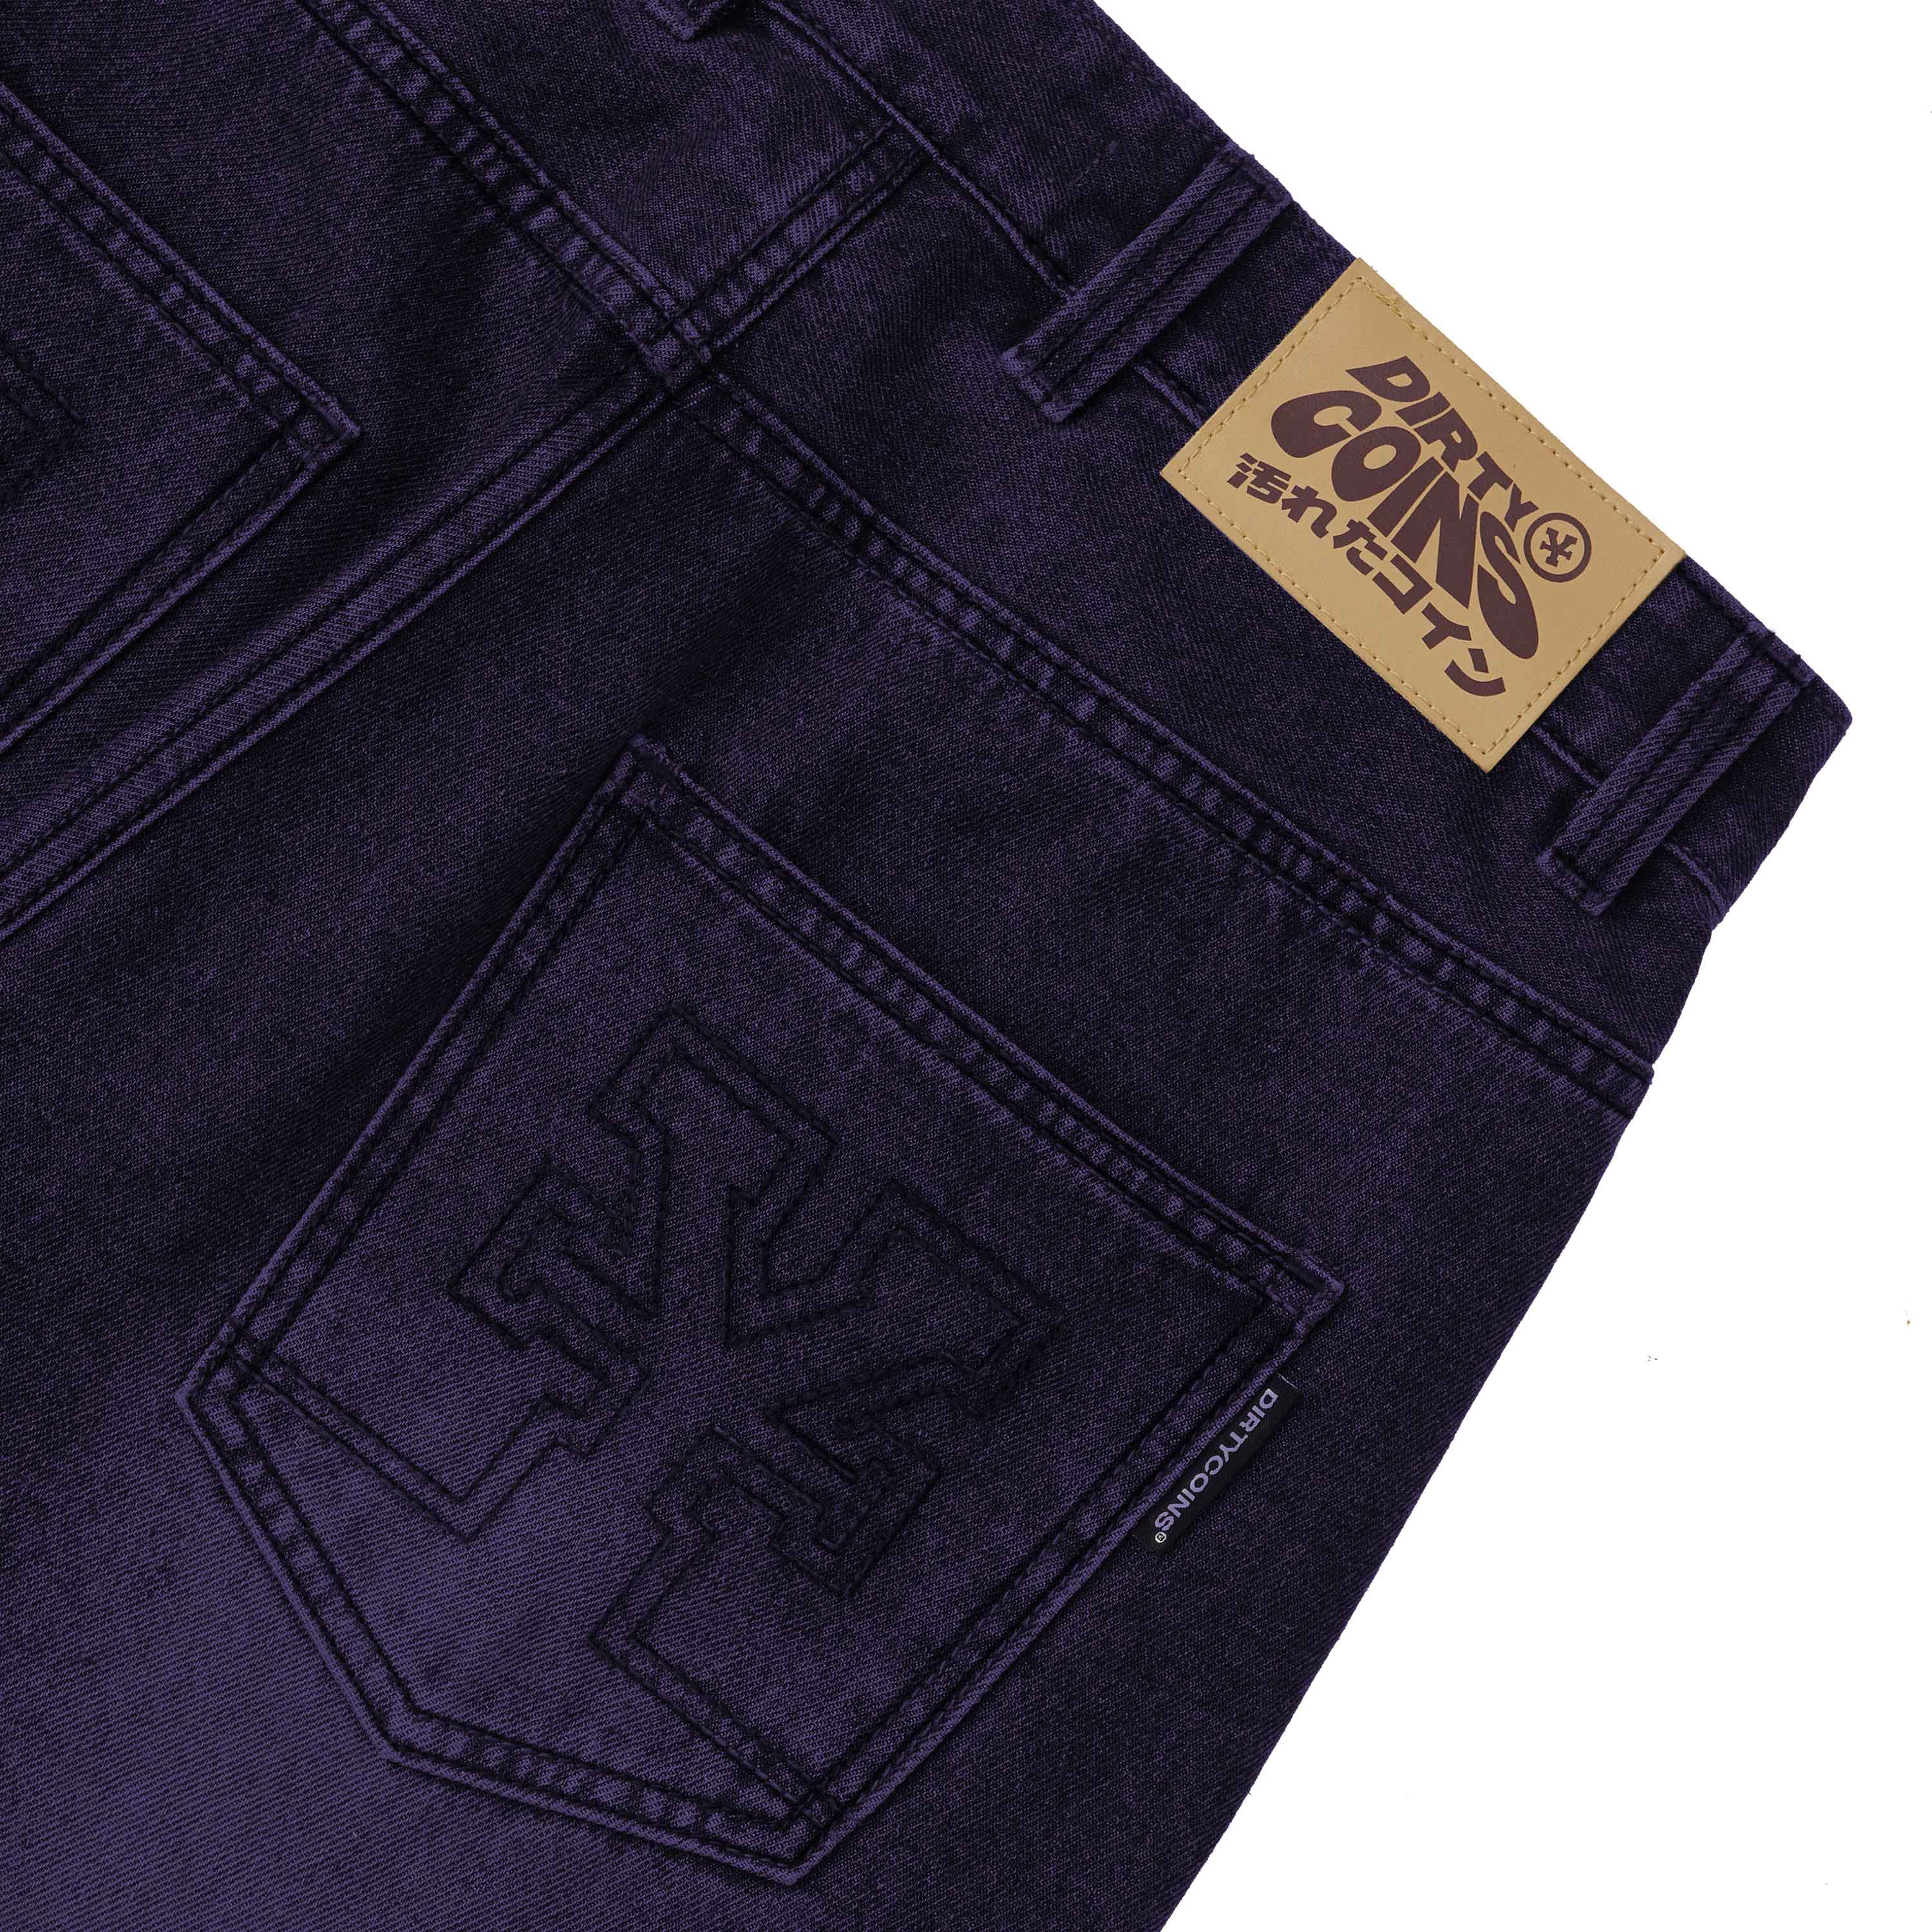 DirtyCoins Baggy Jeans - Purple Wash